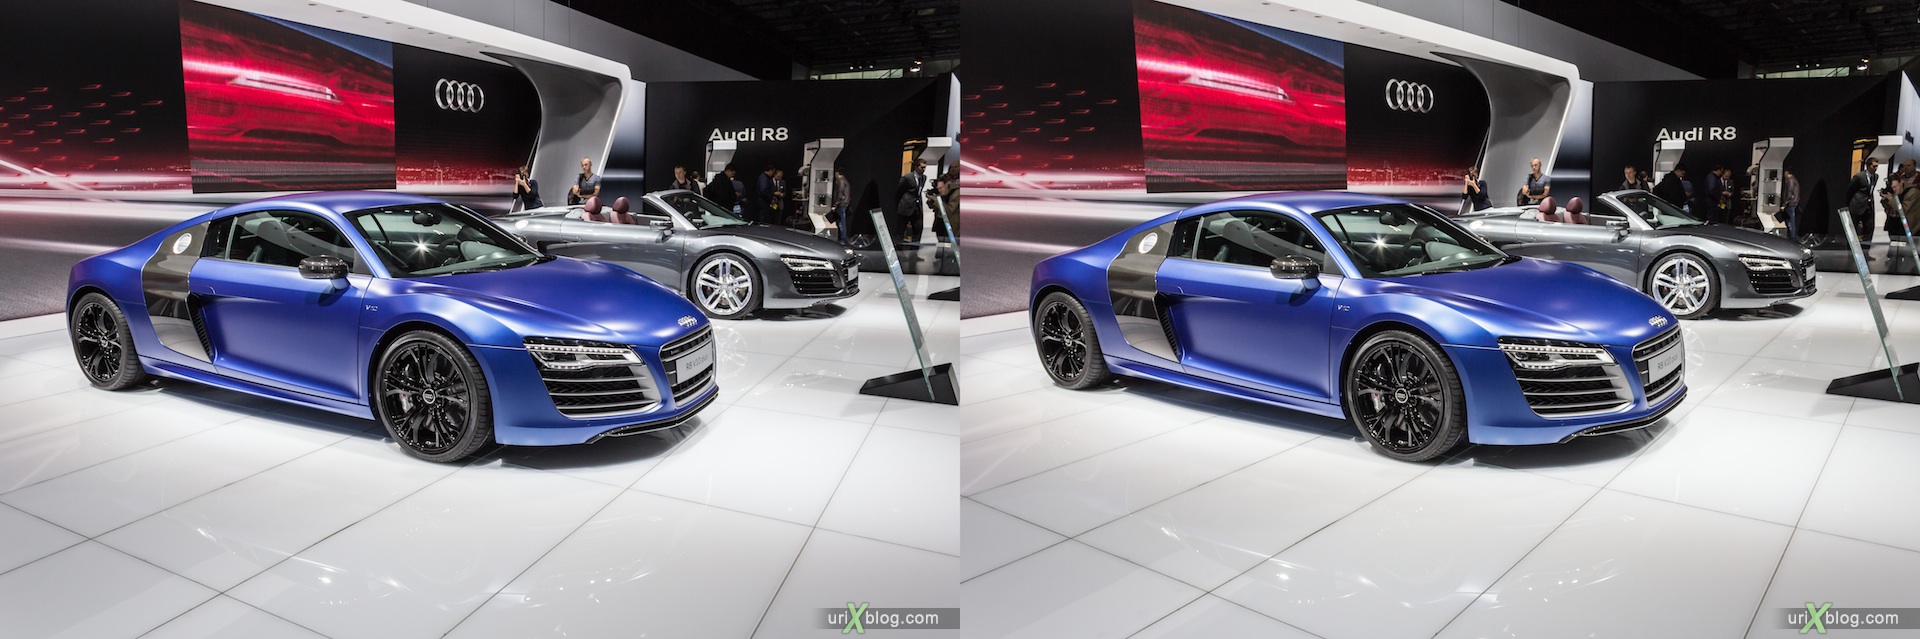 2012, Audi R8 V10, Moscow International Automobile Salon, auto show, 3D, stereo pair, cross-eyed, crossview